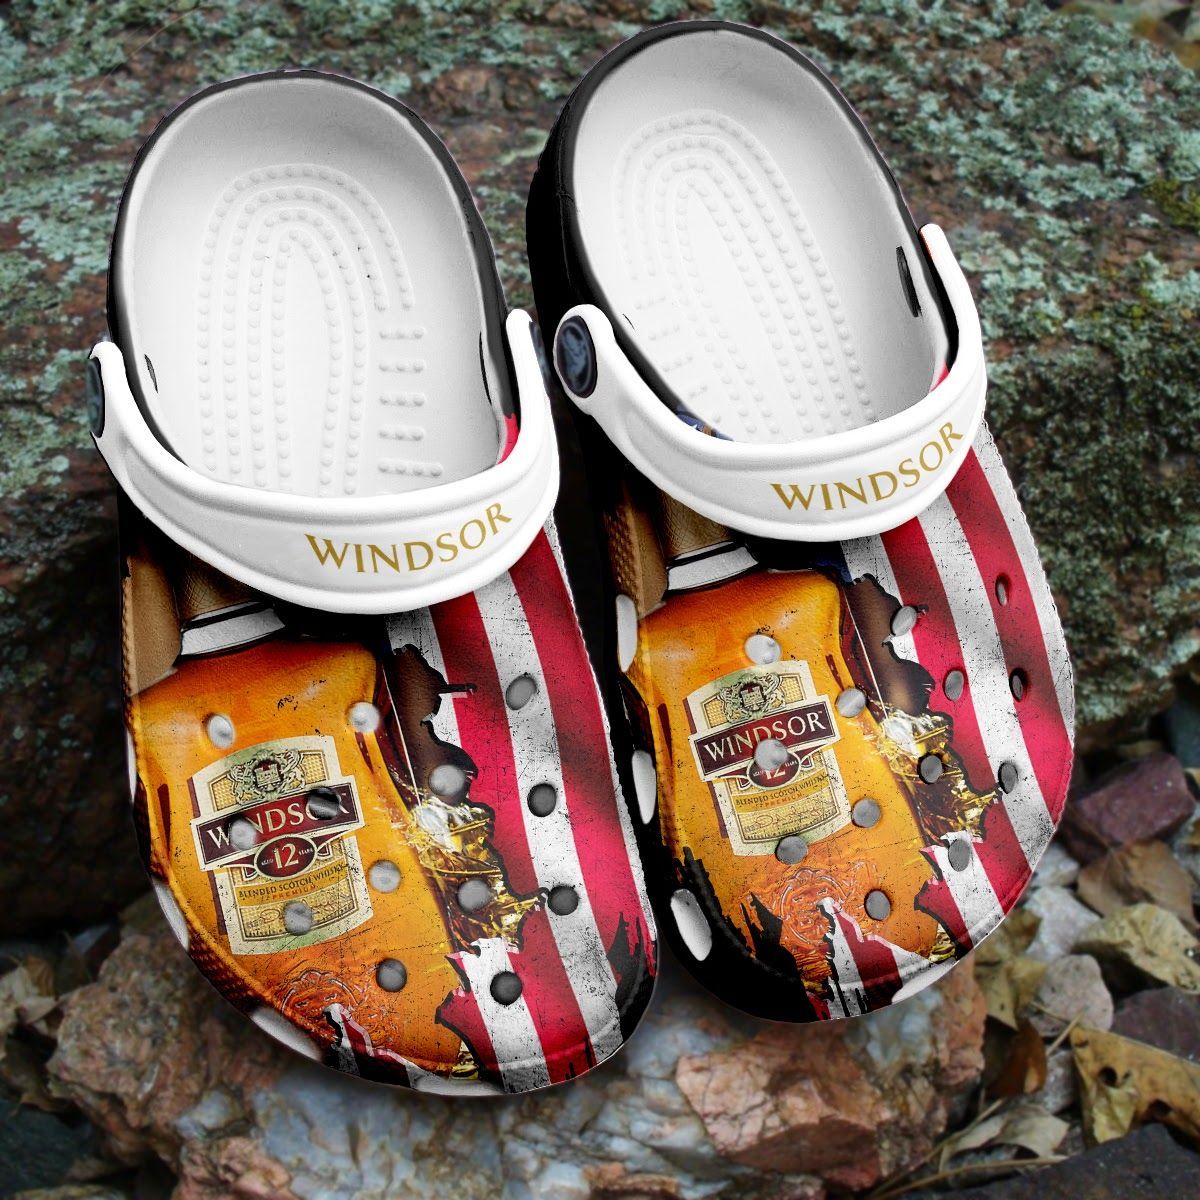 If you'd like to purchase a pair of Crocband Clogs, be sure to check out the official website. 116